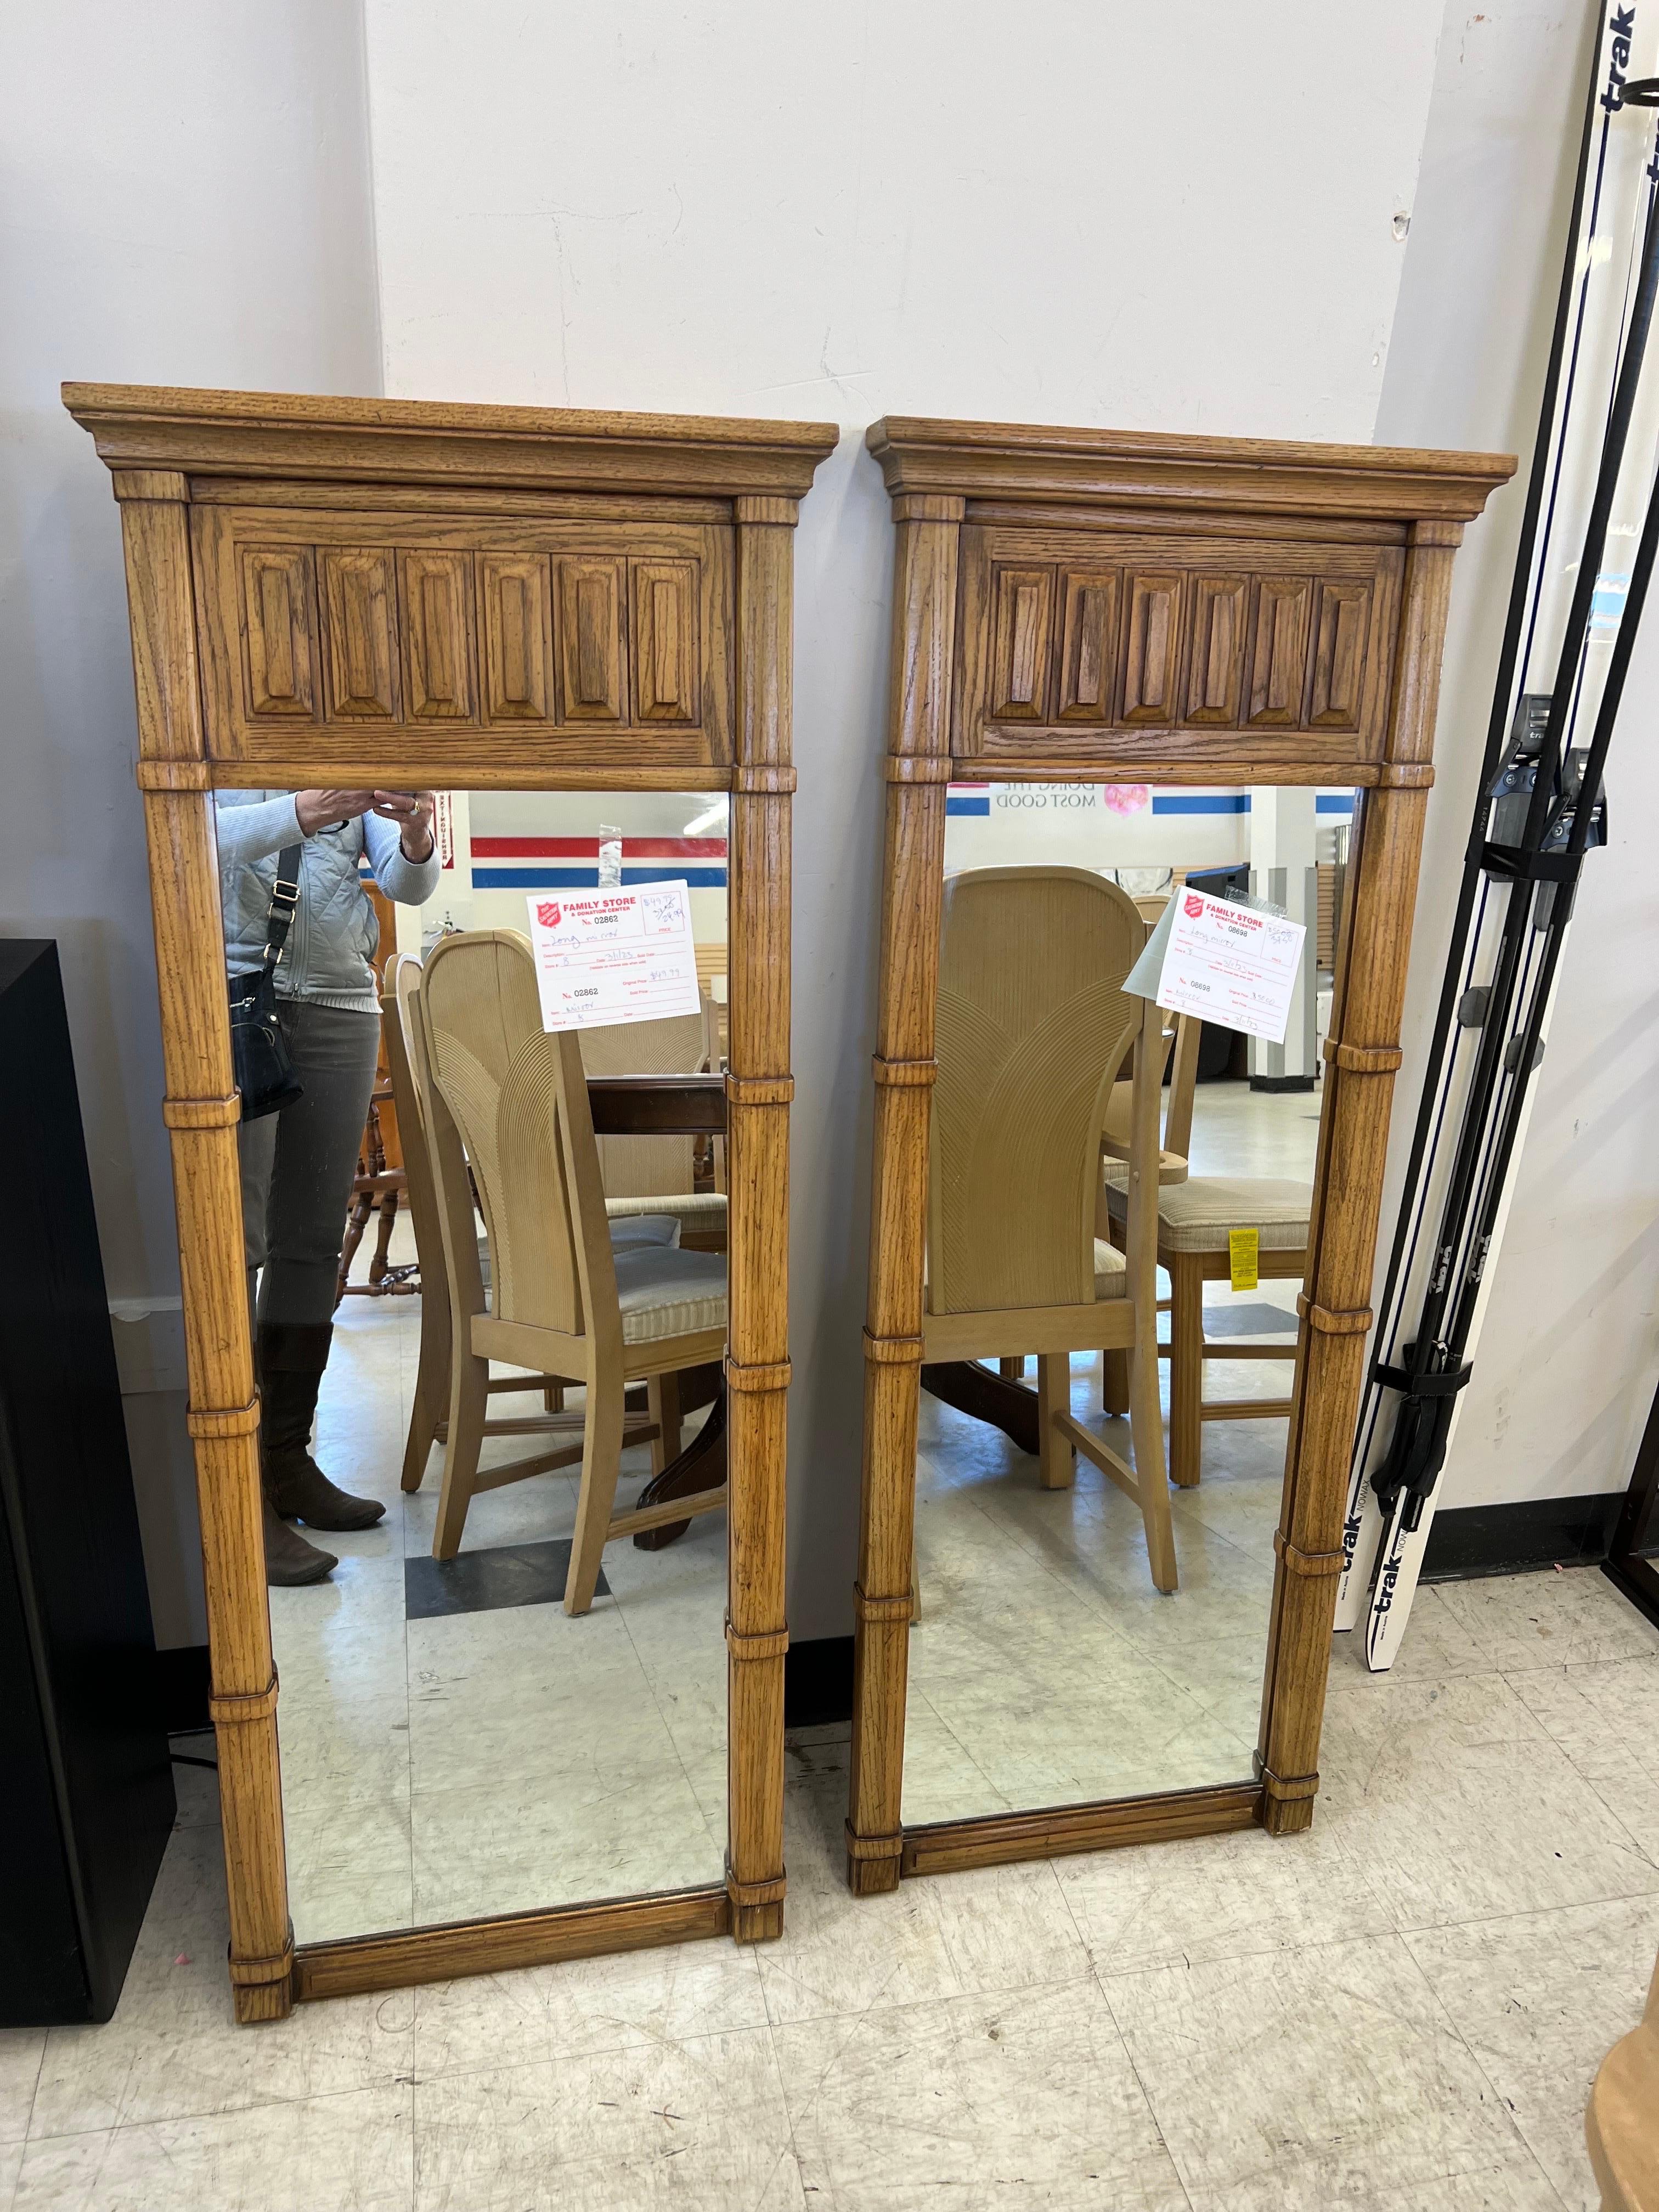 Pair of Thomasville midcentury Wall Mirrors circa 1970s. Perfect for above a vanity for his and hers sink. Solid wooden construction. Timeless design. Price is per set/pair of 2 mirrors. 